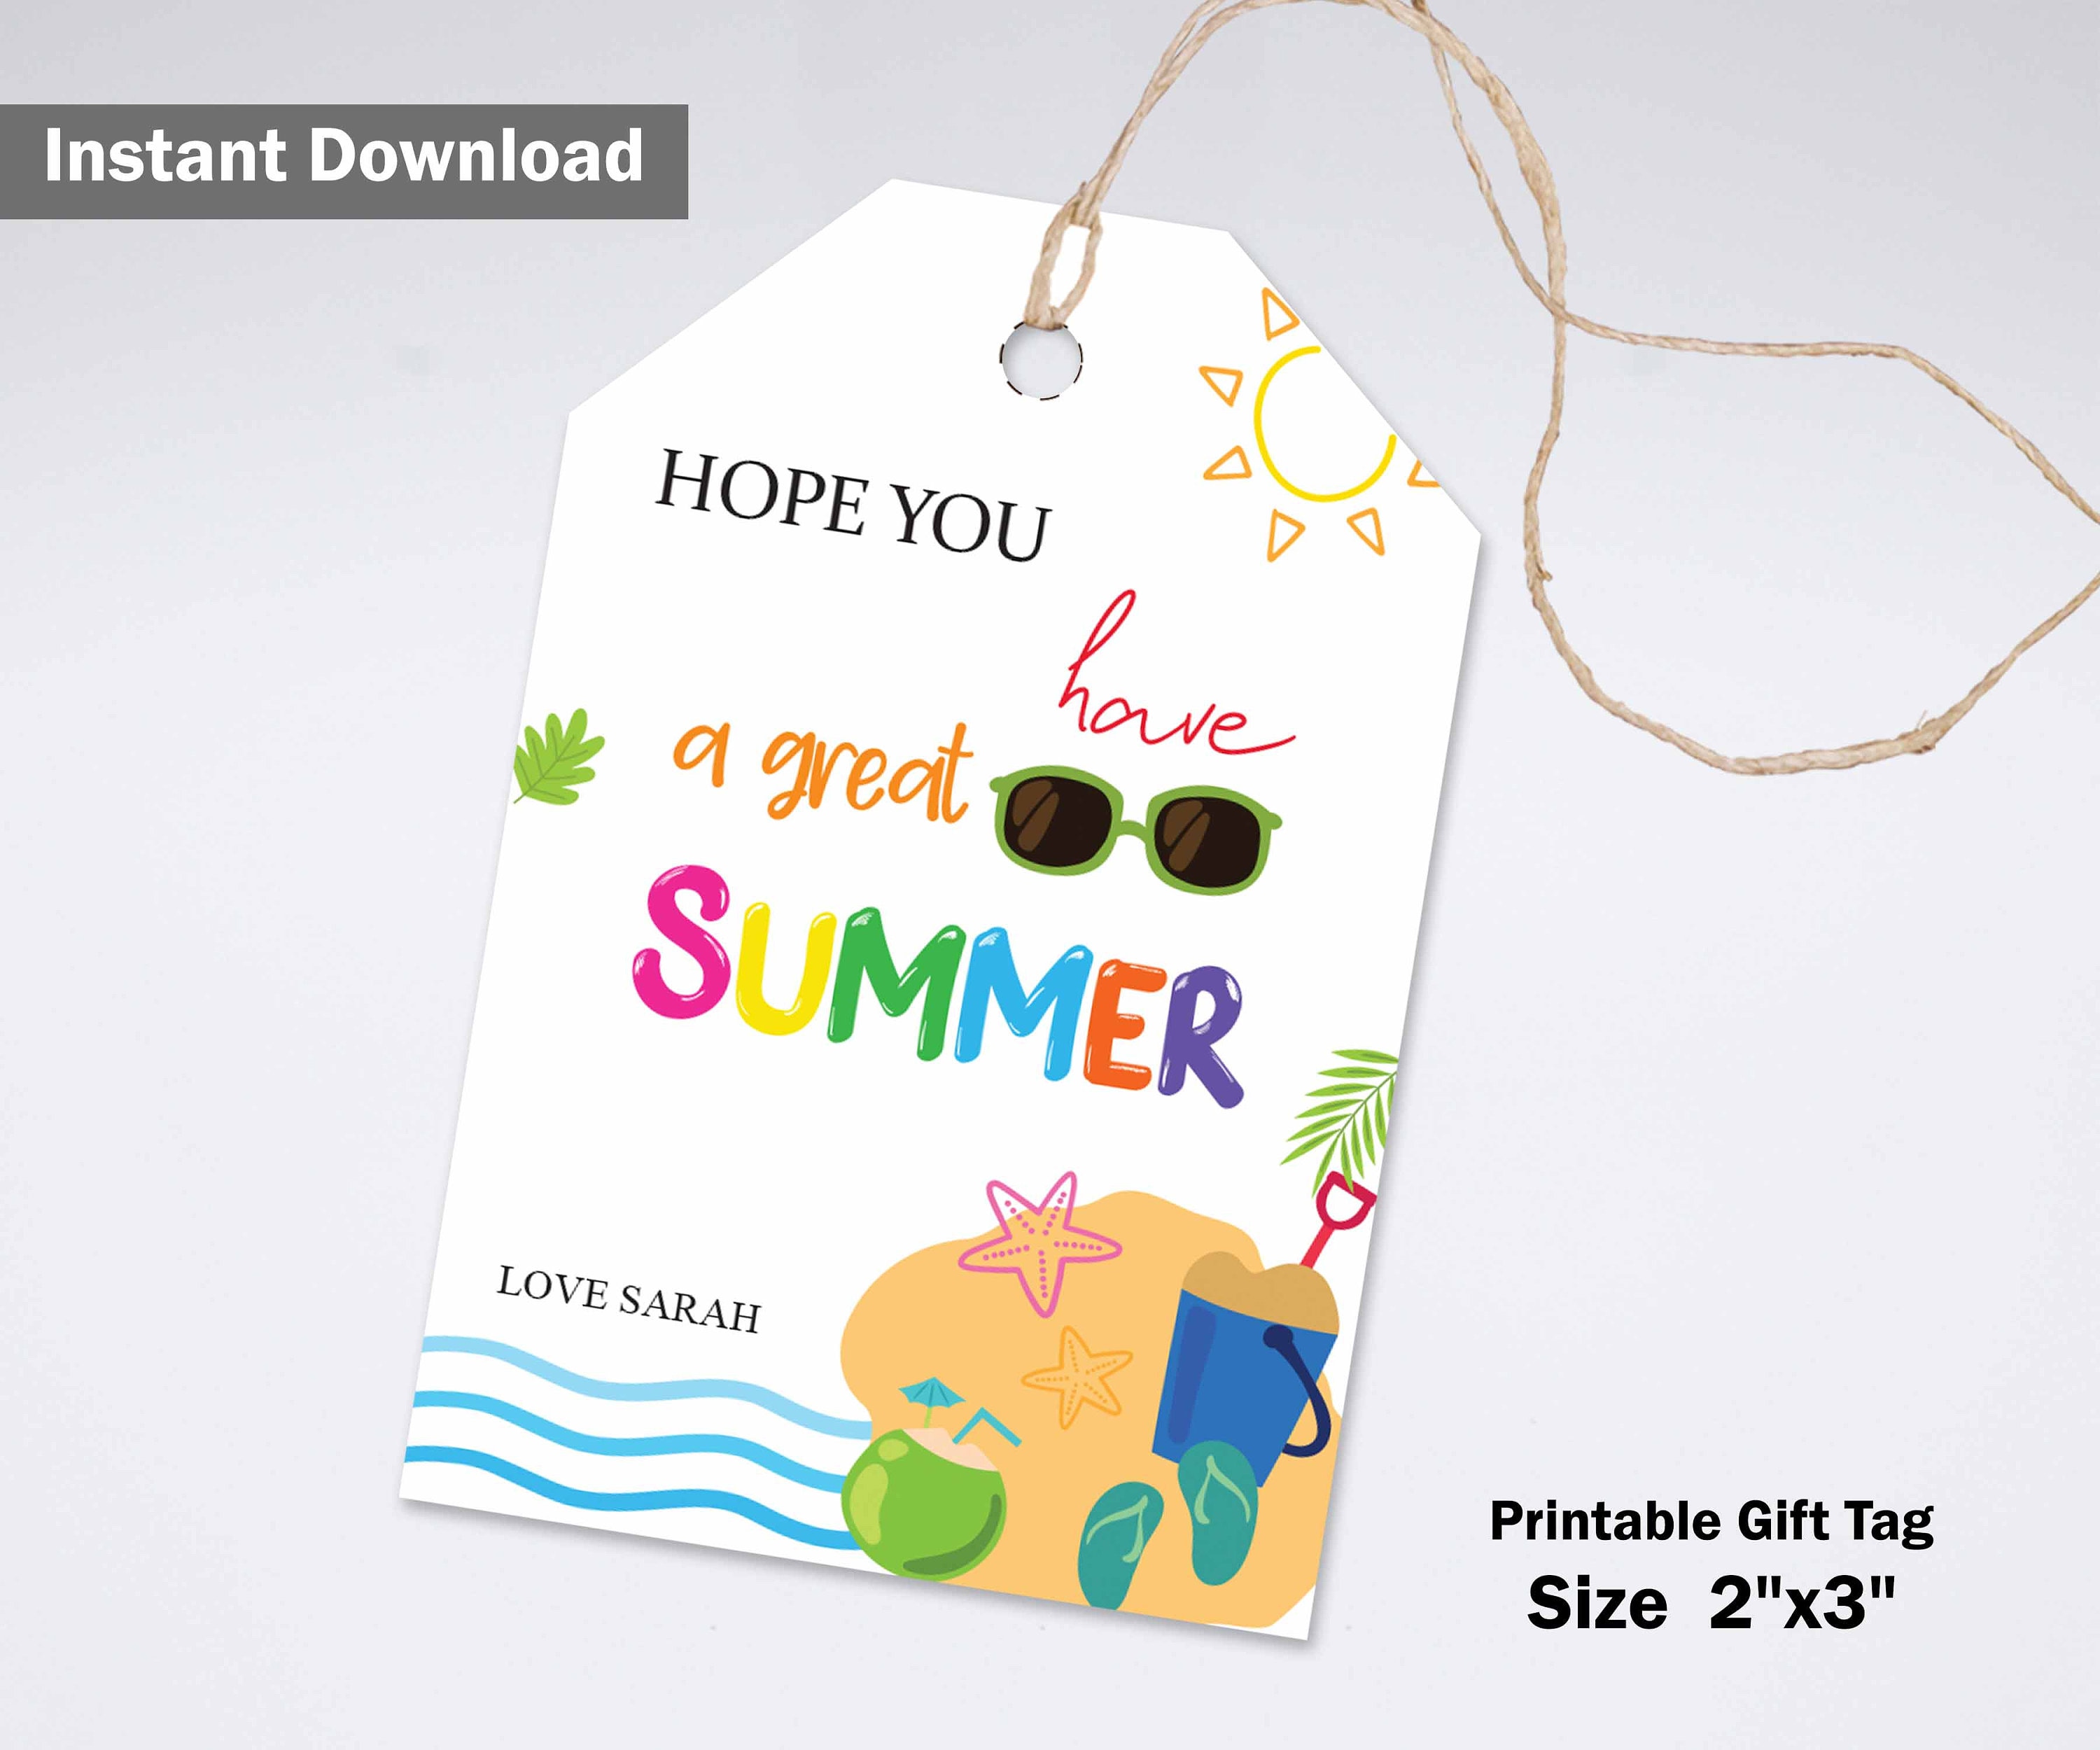 hope-you-have-a-great-summer-gift-tags-printable-summer-gift-etsy-espa-a